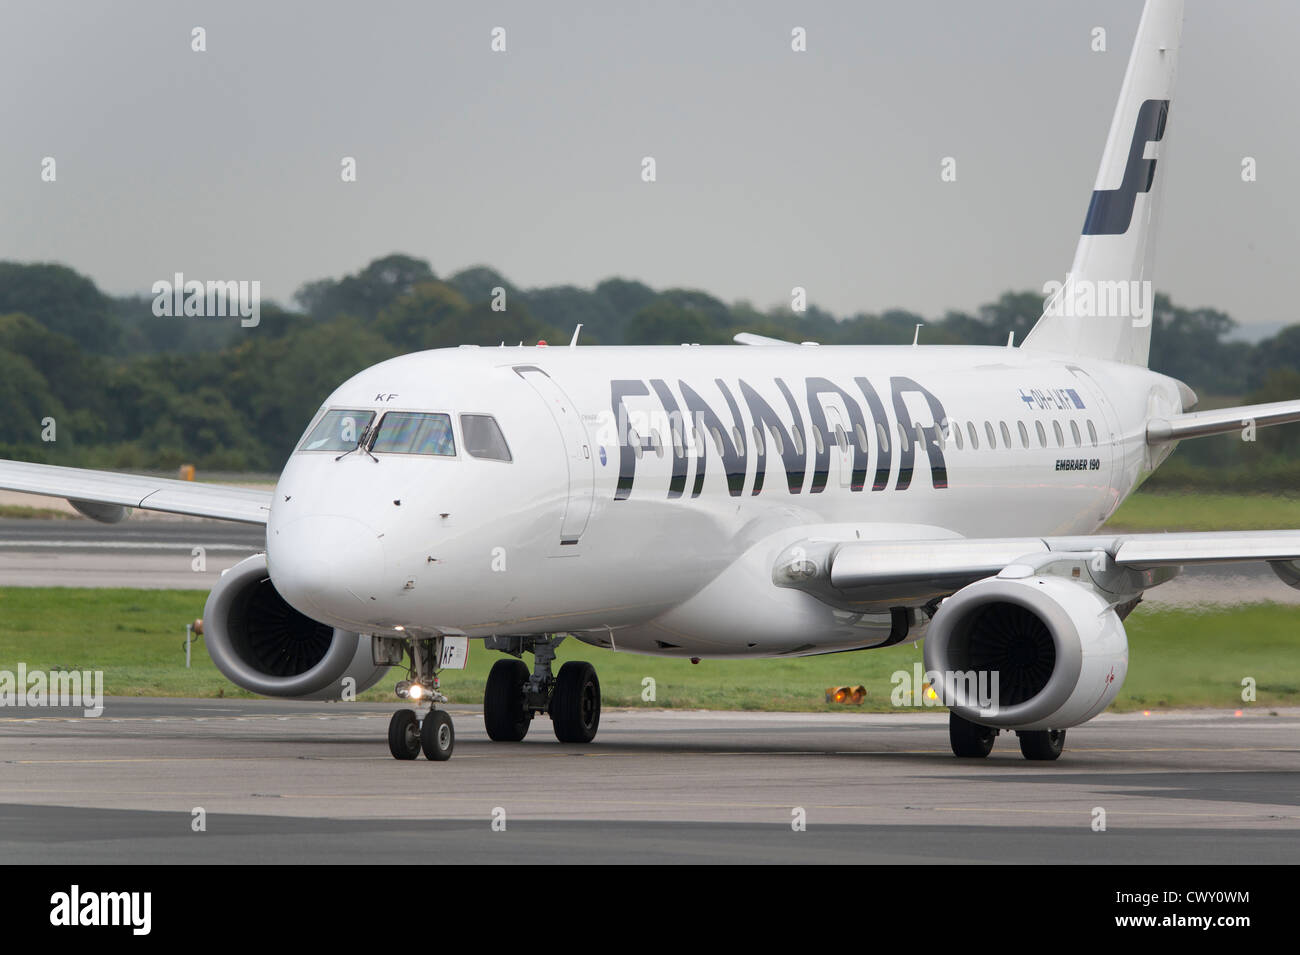 A Finnair Embraer 190 taxiing on the runway of Manchester International Airport (Editorial use only) Stock Photo